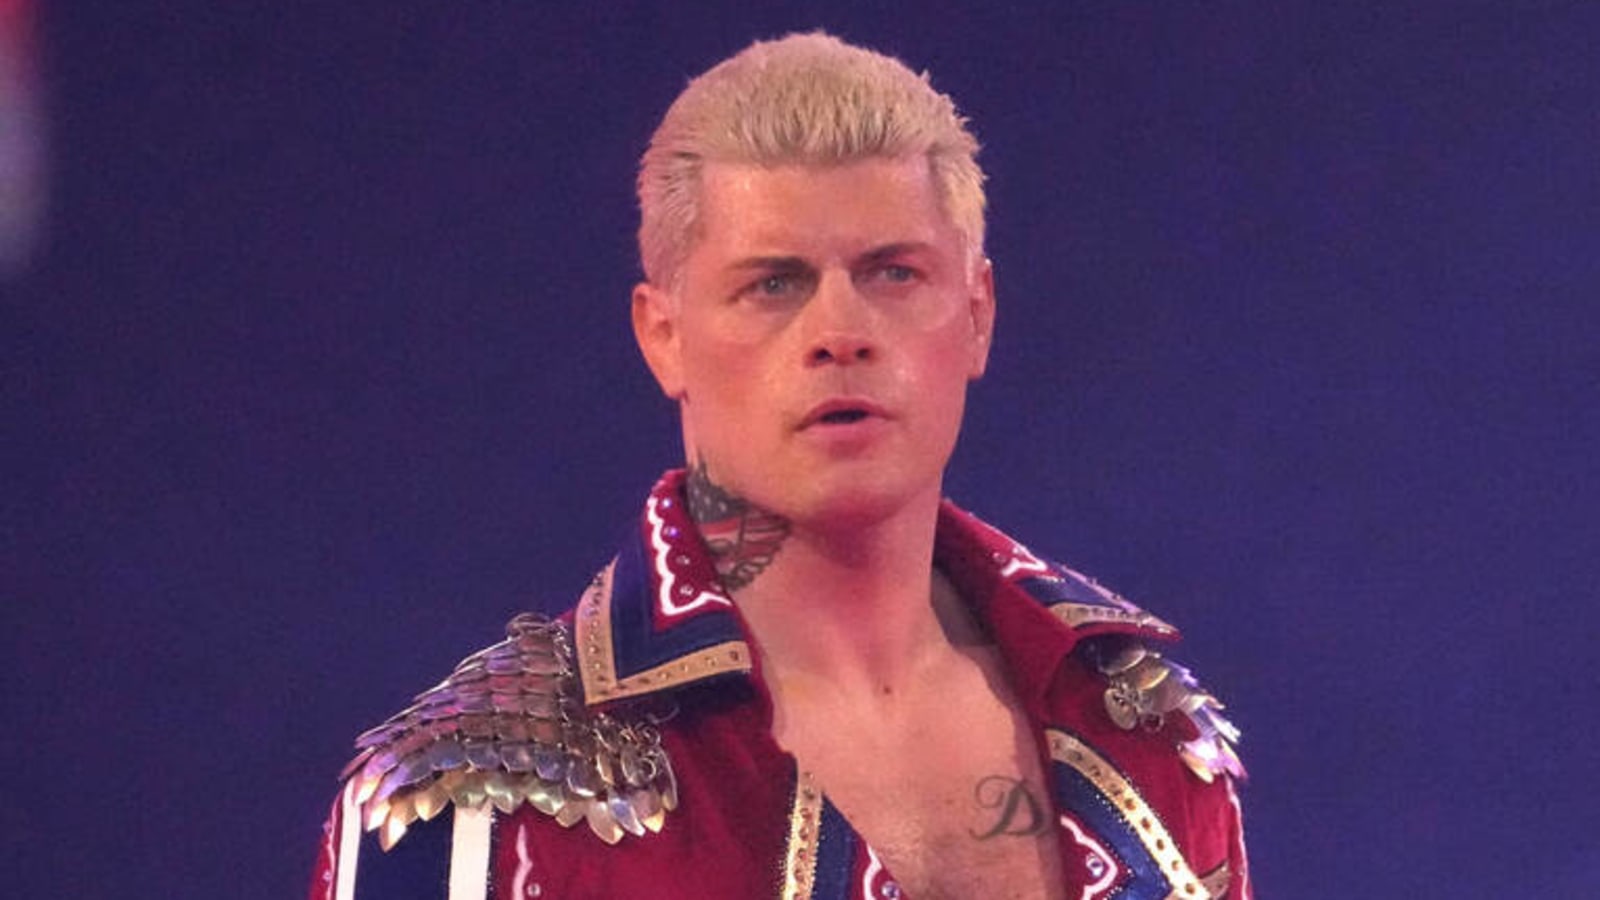 Cody Rhodes wrestled with a nasty torn pec muscle